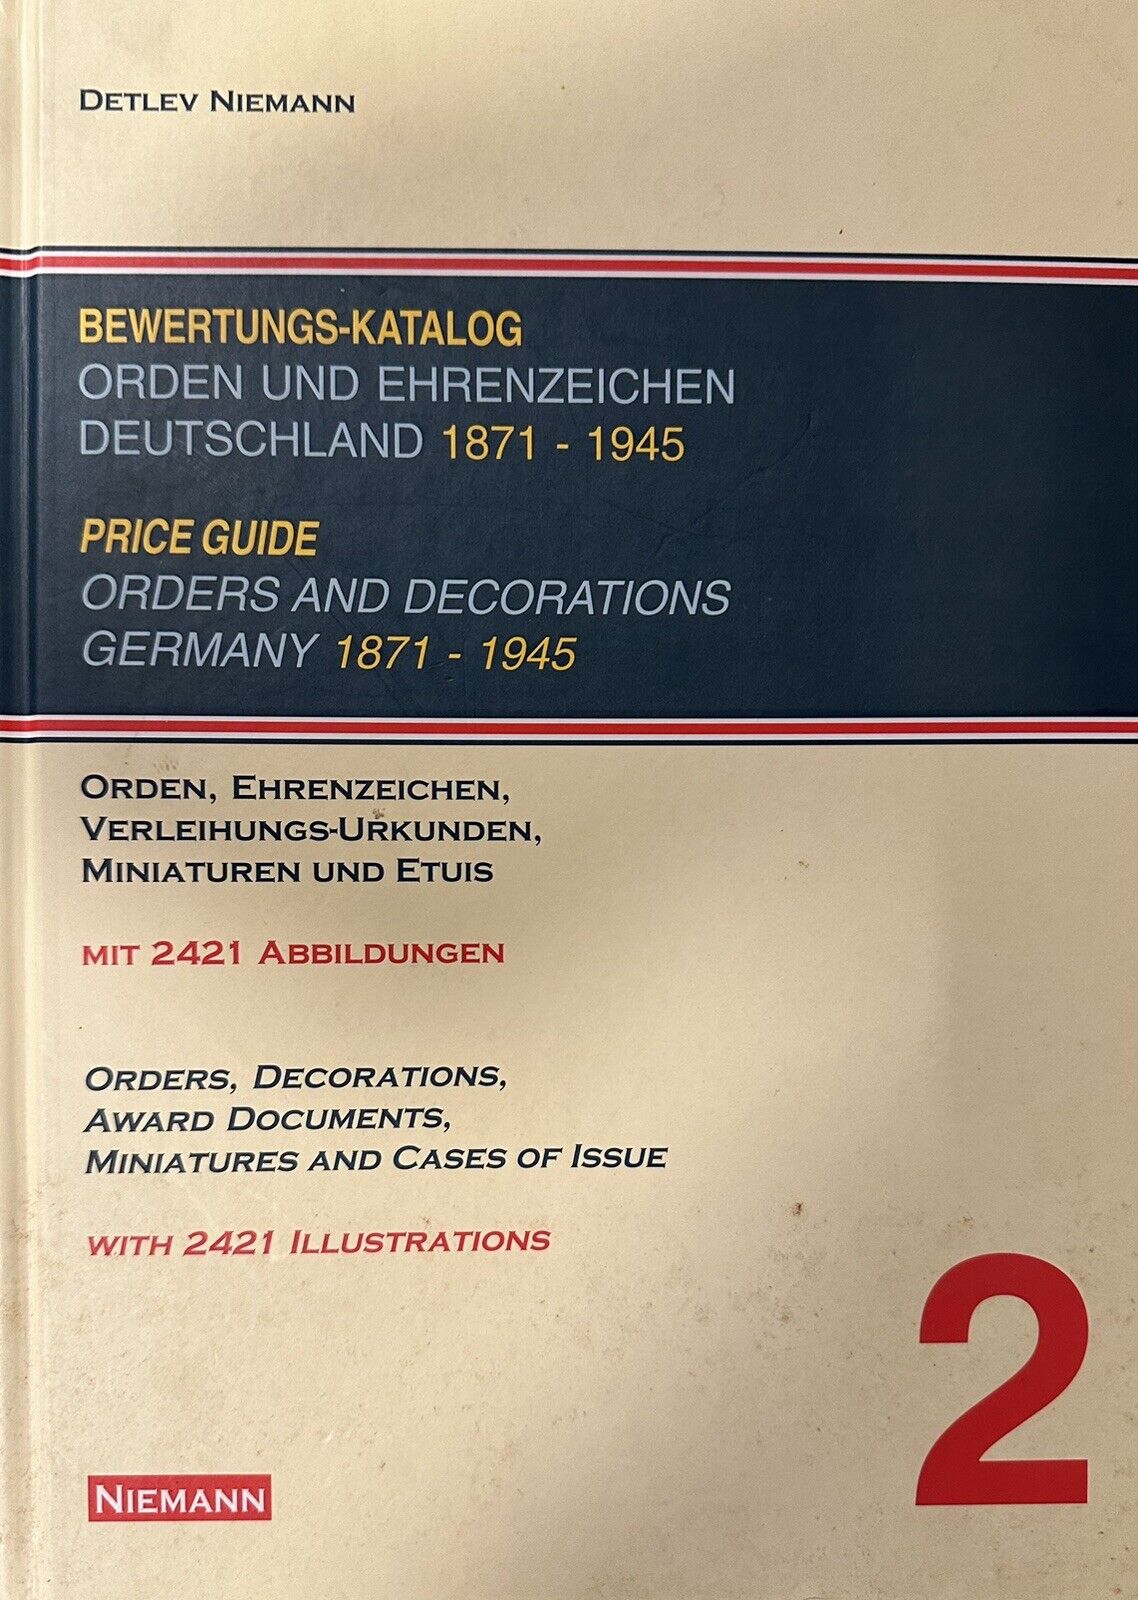 WW1 WW2 German Niemann Price Guide 2 Orders Decorations 1871-1945 Reference Book